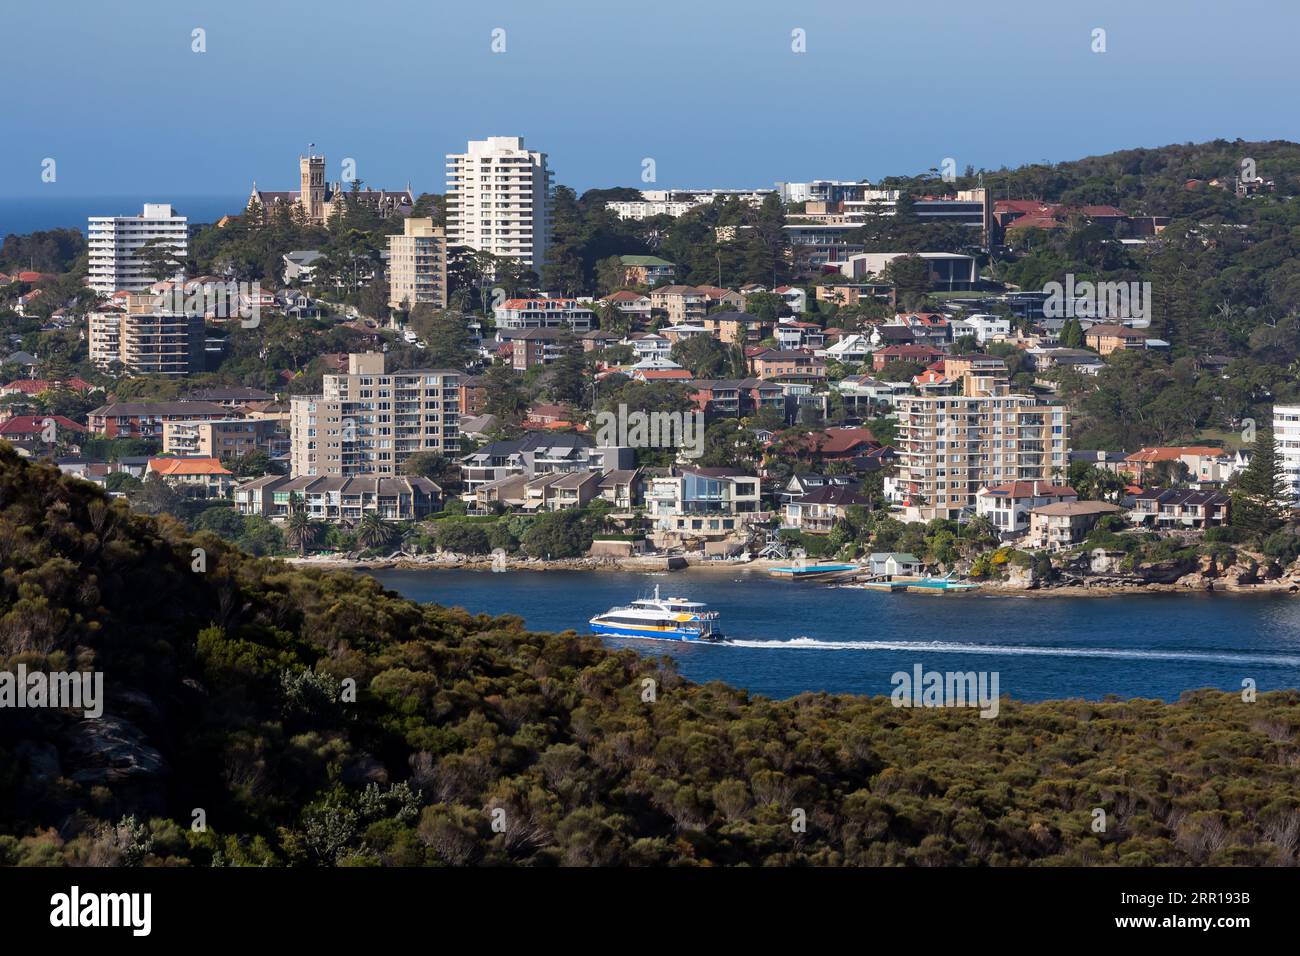 Headland Park, Mosman is comprised of three precincts overlooking Sydney Harbour-Chowder Bay/Georges Heights and Middle Head. Formerly the site of 6 D Stock Photo